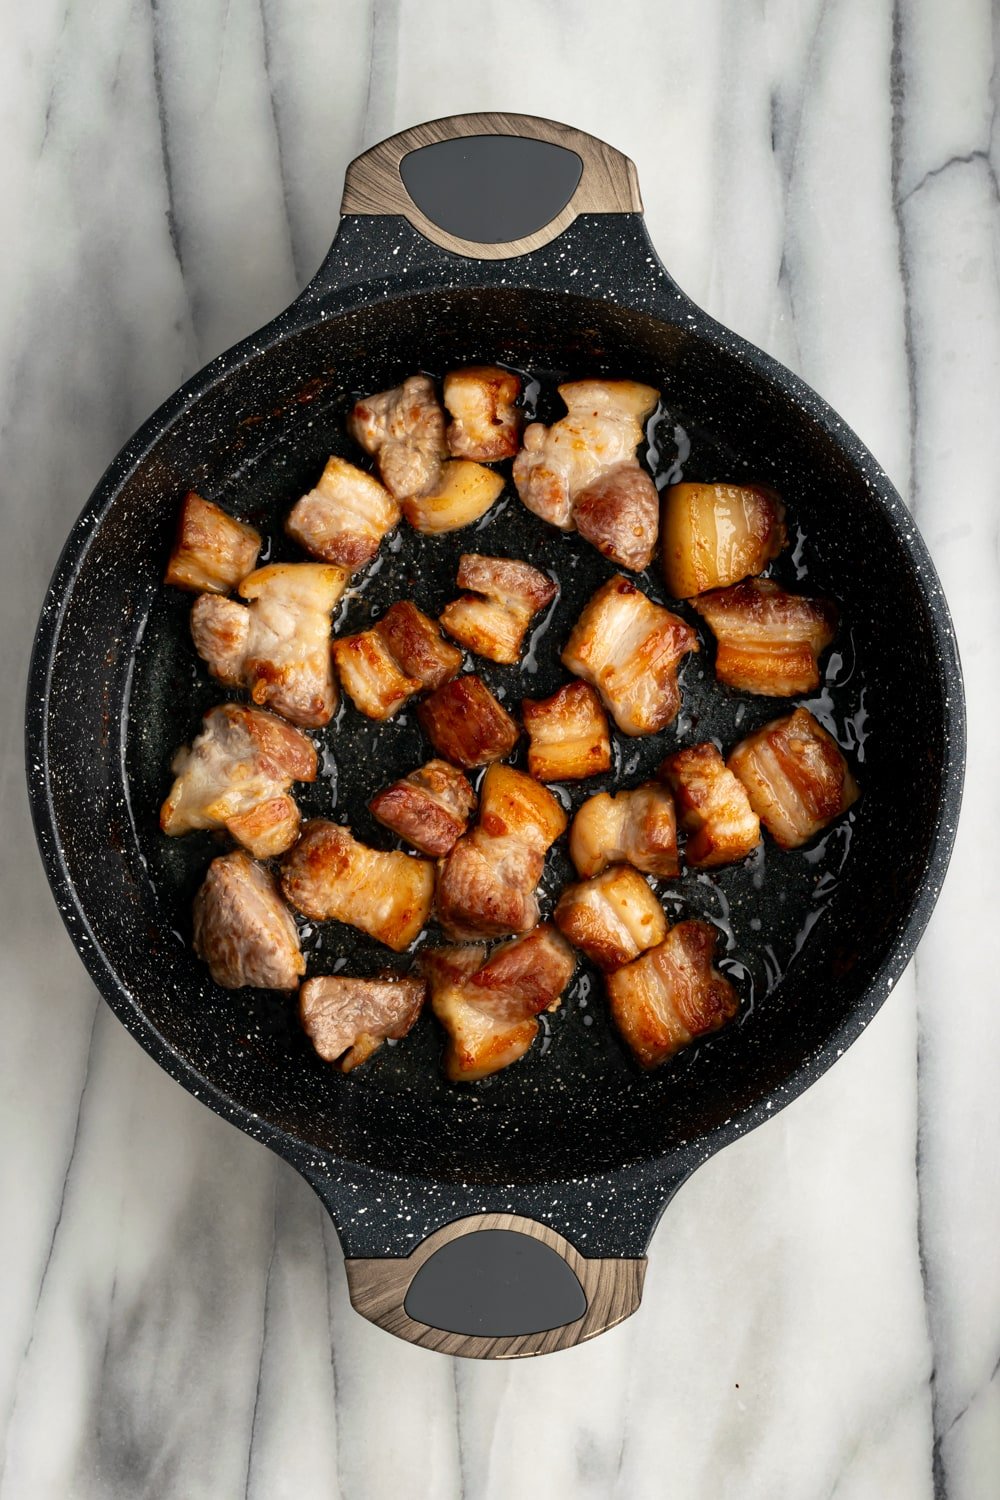 Pork belly pieces cooking in a cast iron pan to make chicharrones de puerco on a marble countertop